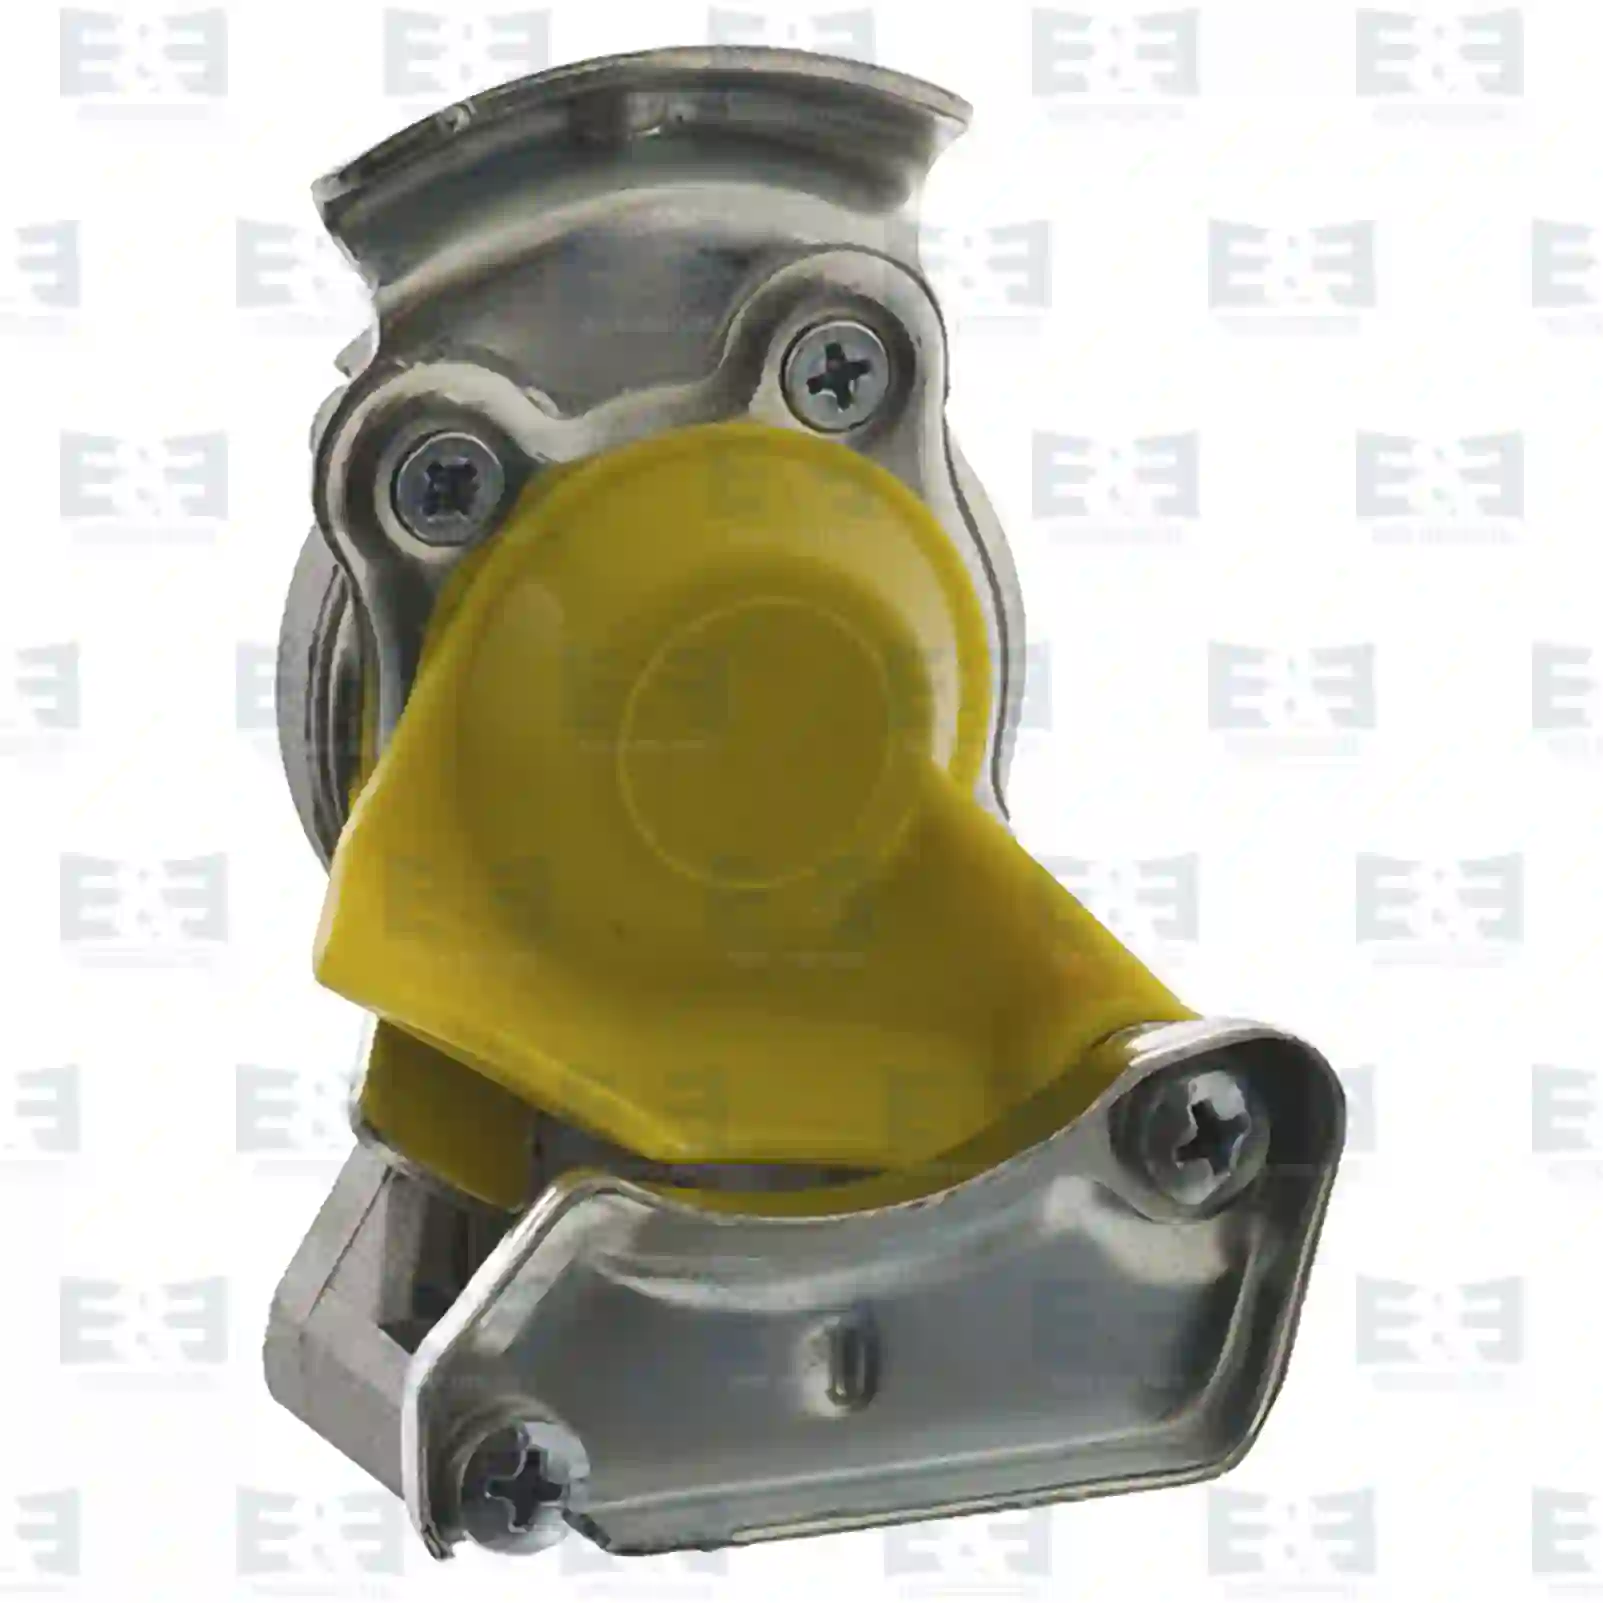  Palm coupling, yellow lid || E&E Truck Spare Parts | Truck Spare Parts, Auotomotive Spare Parts